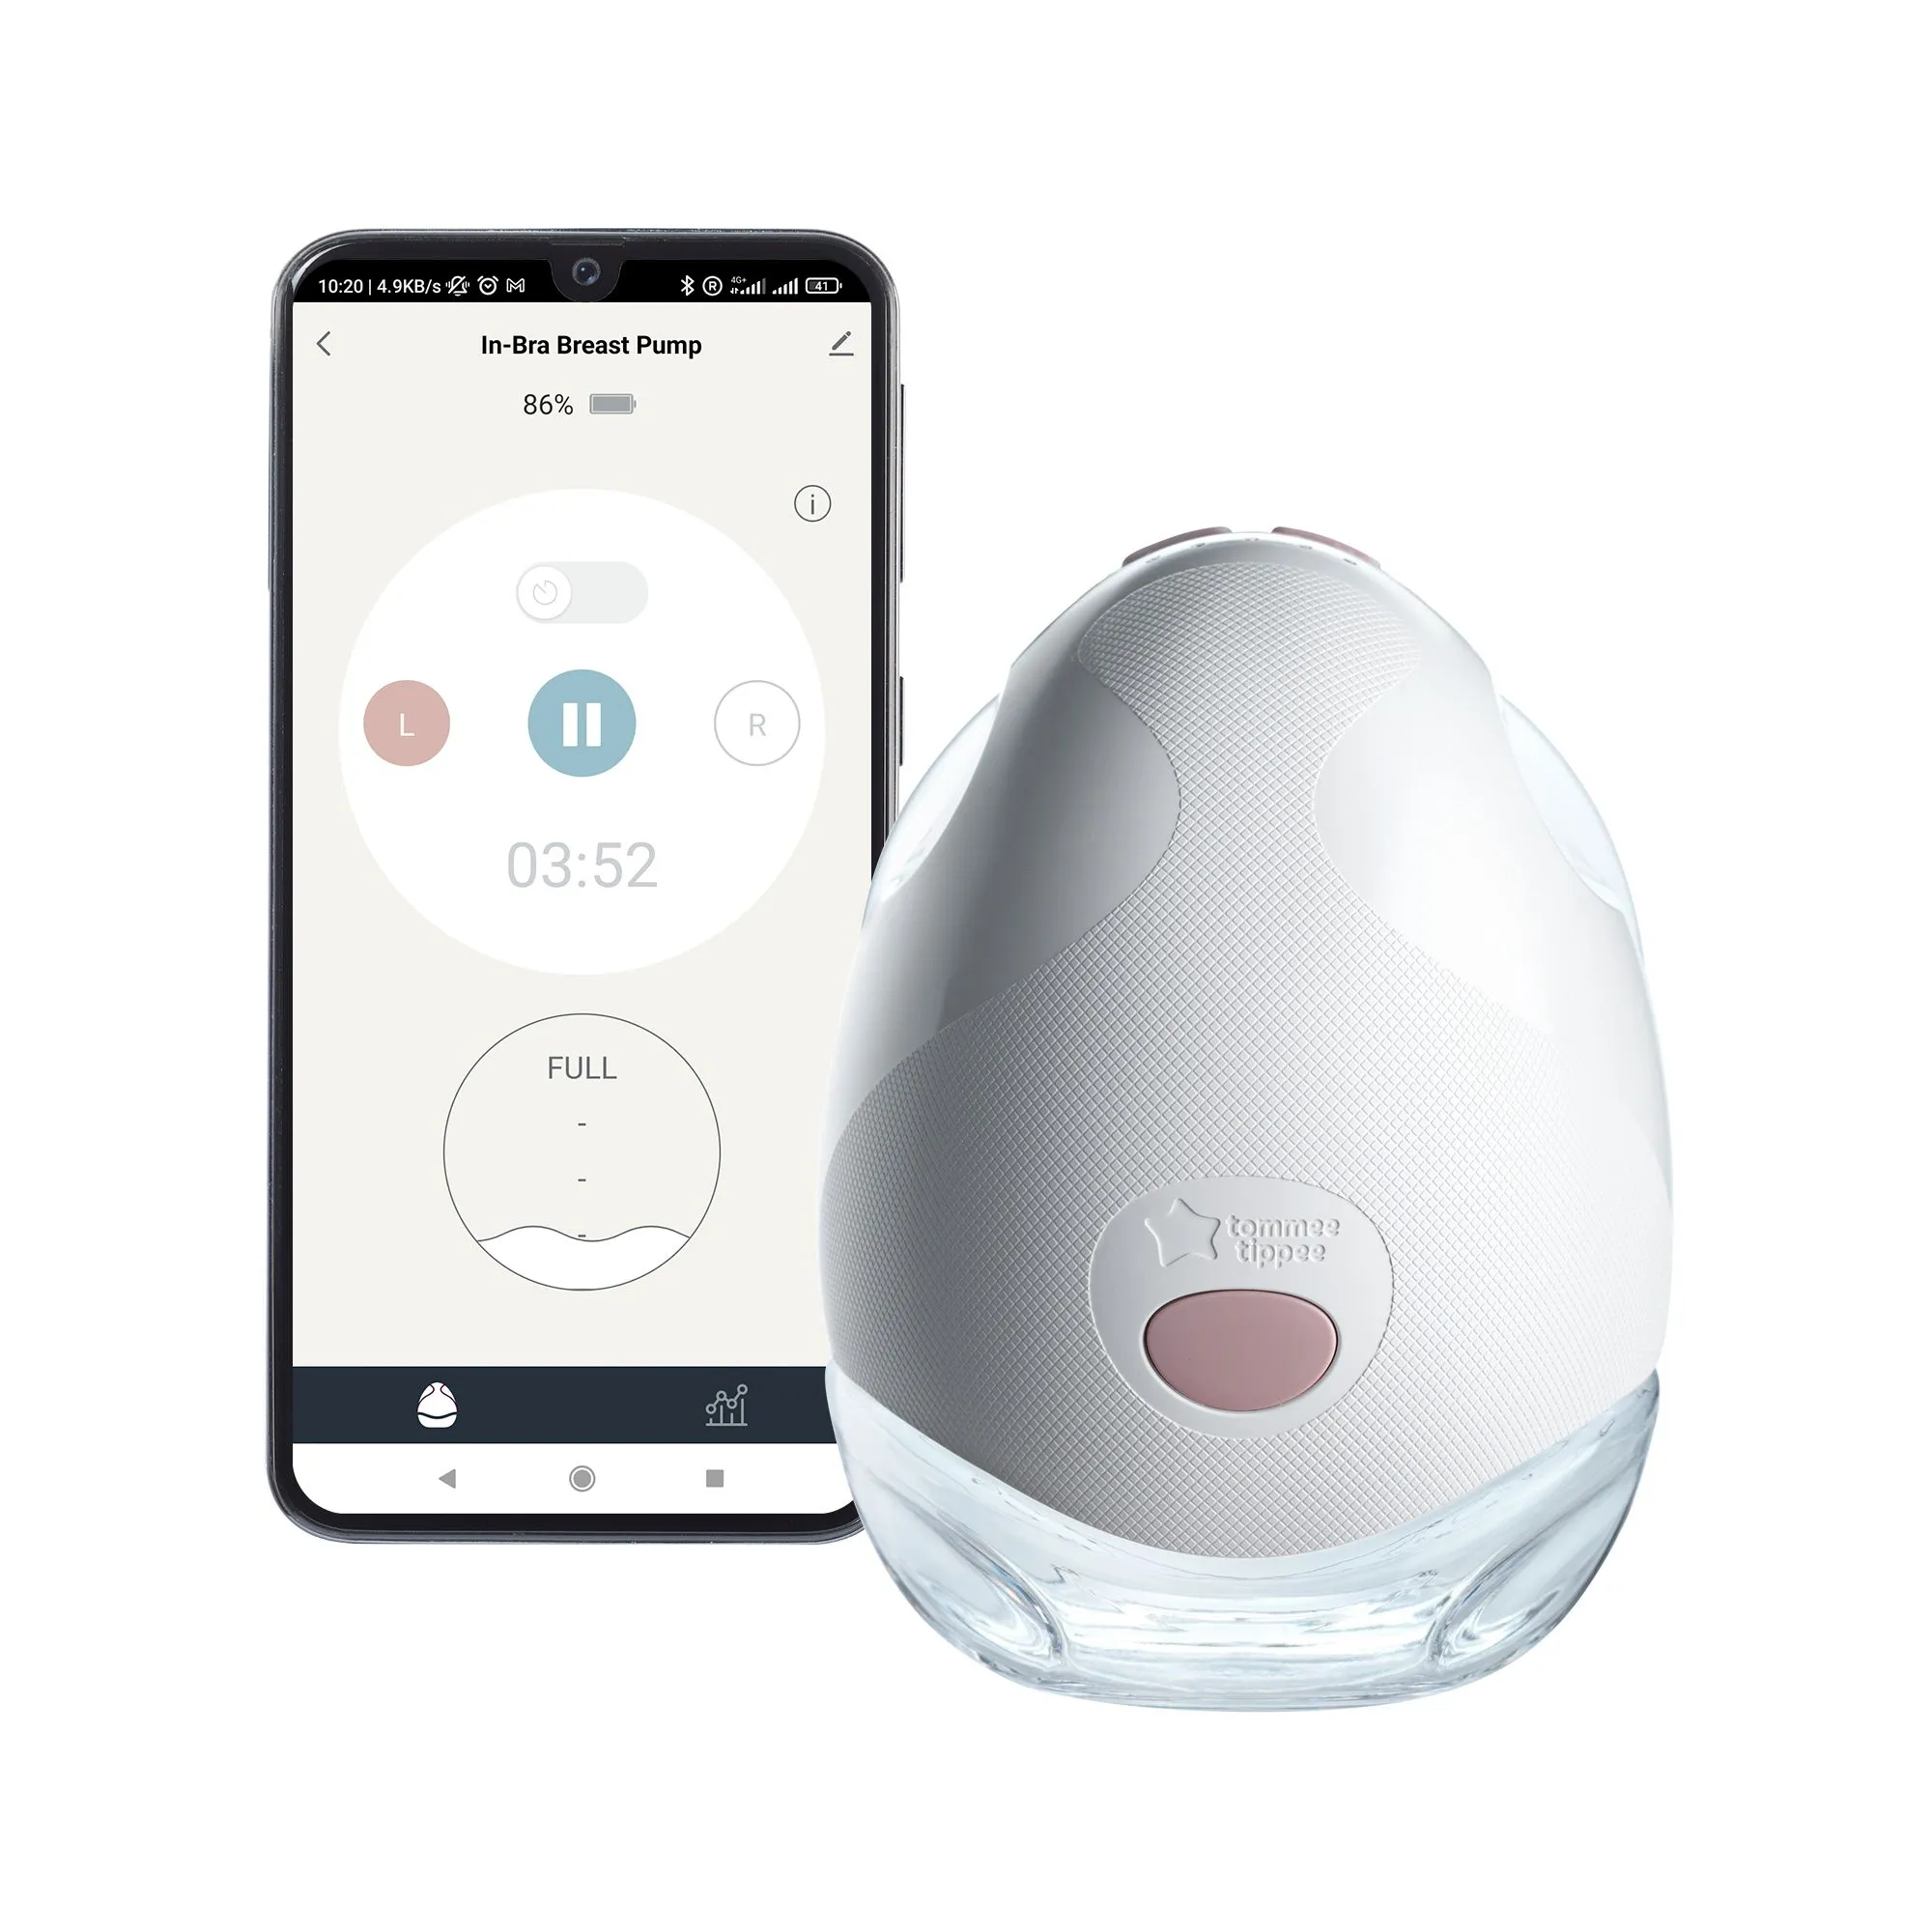 who loves their wearable pump? 🙋🏻🙋🏻 #tommeetippee